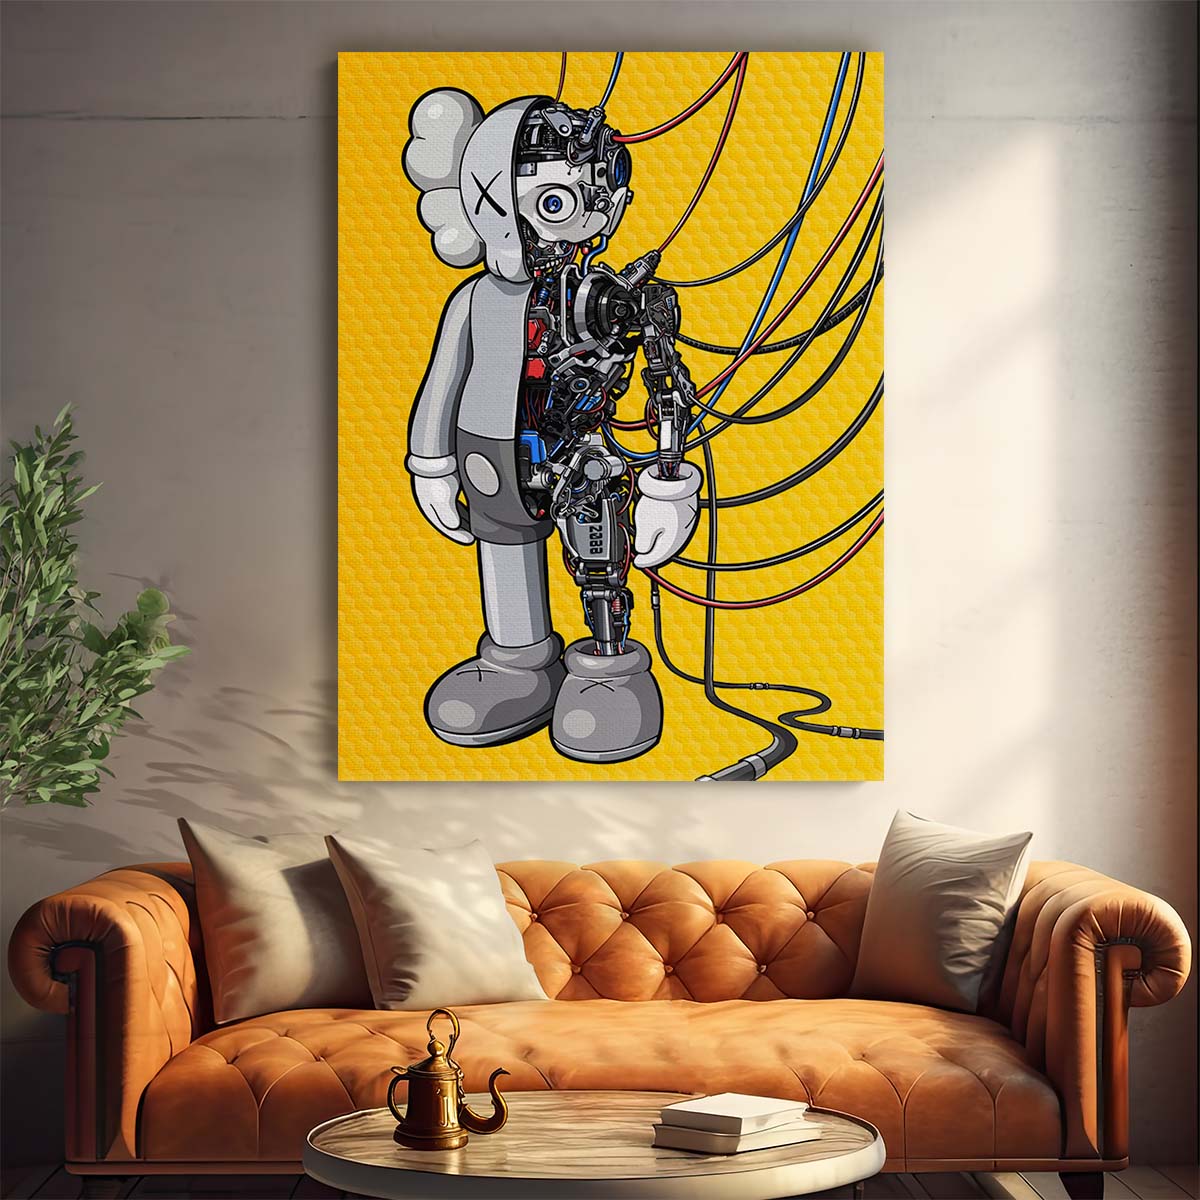 Hypebeast Kaws Robot Android Cartoon Wall Art by Luxuriance Designs. Made in USA.